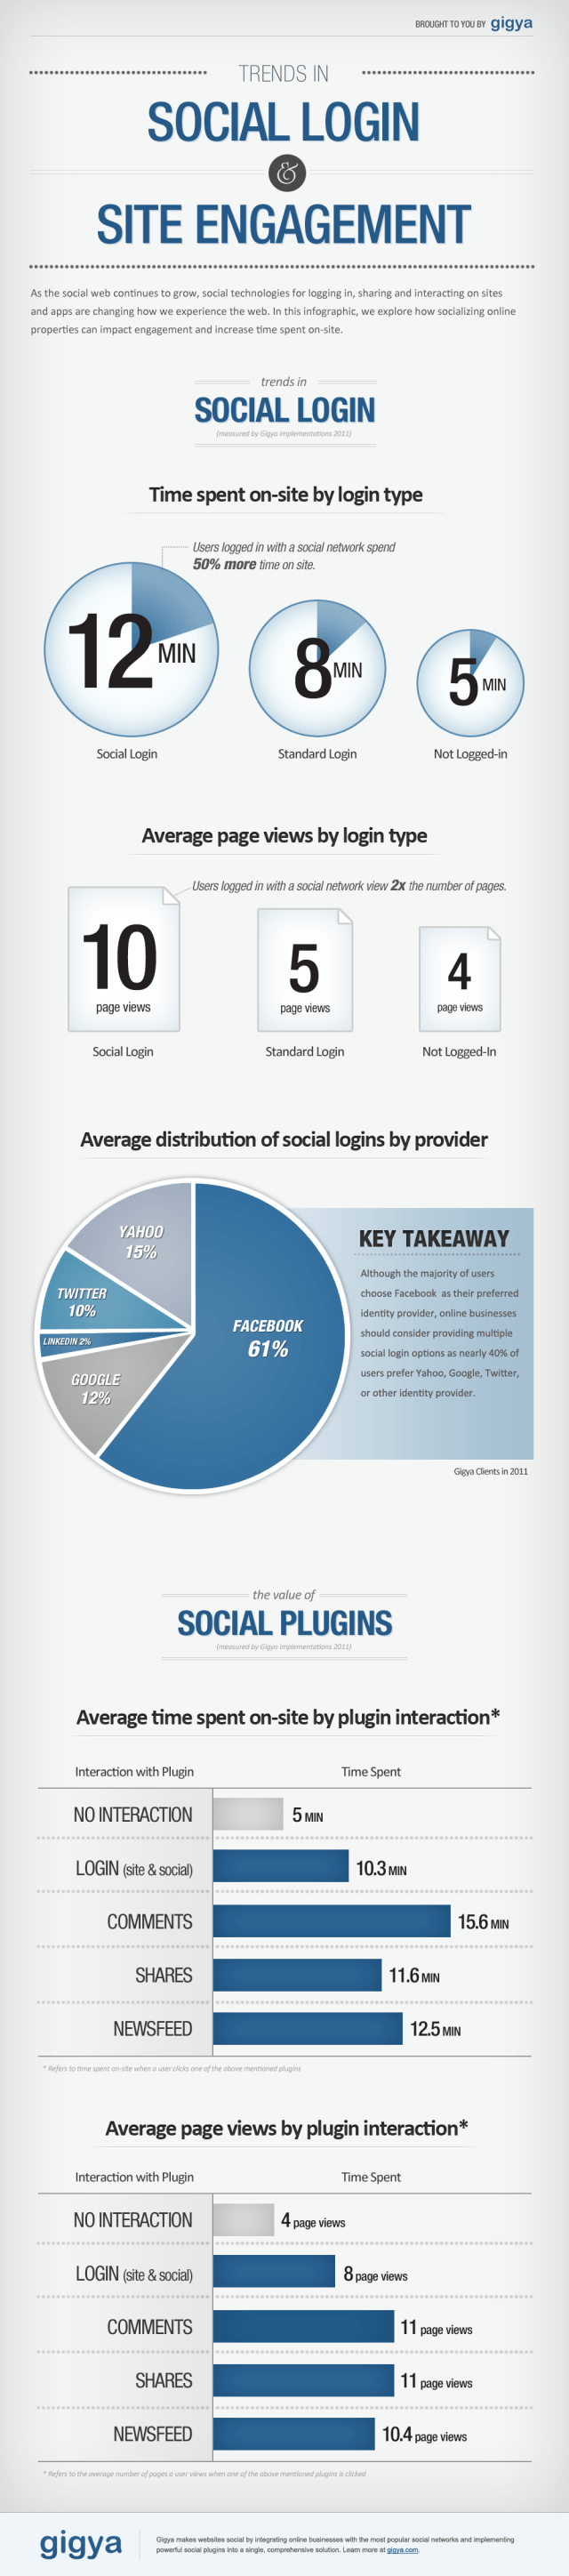 social login and engagement infographic by gigya